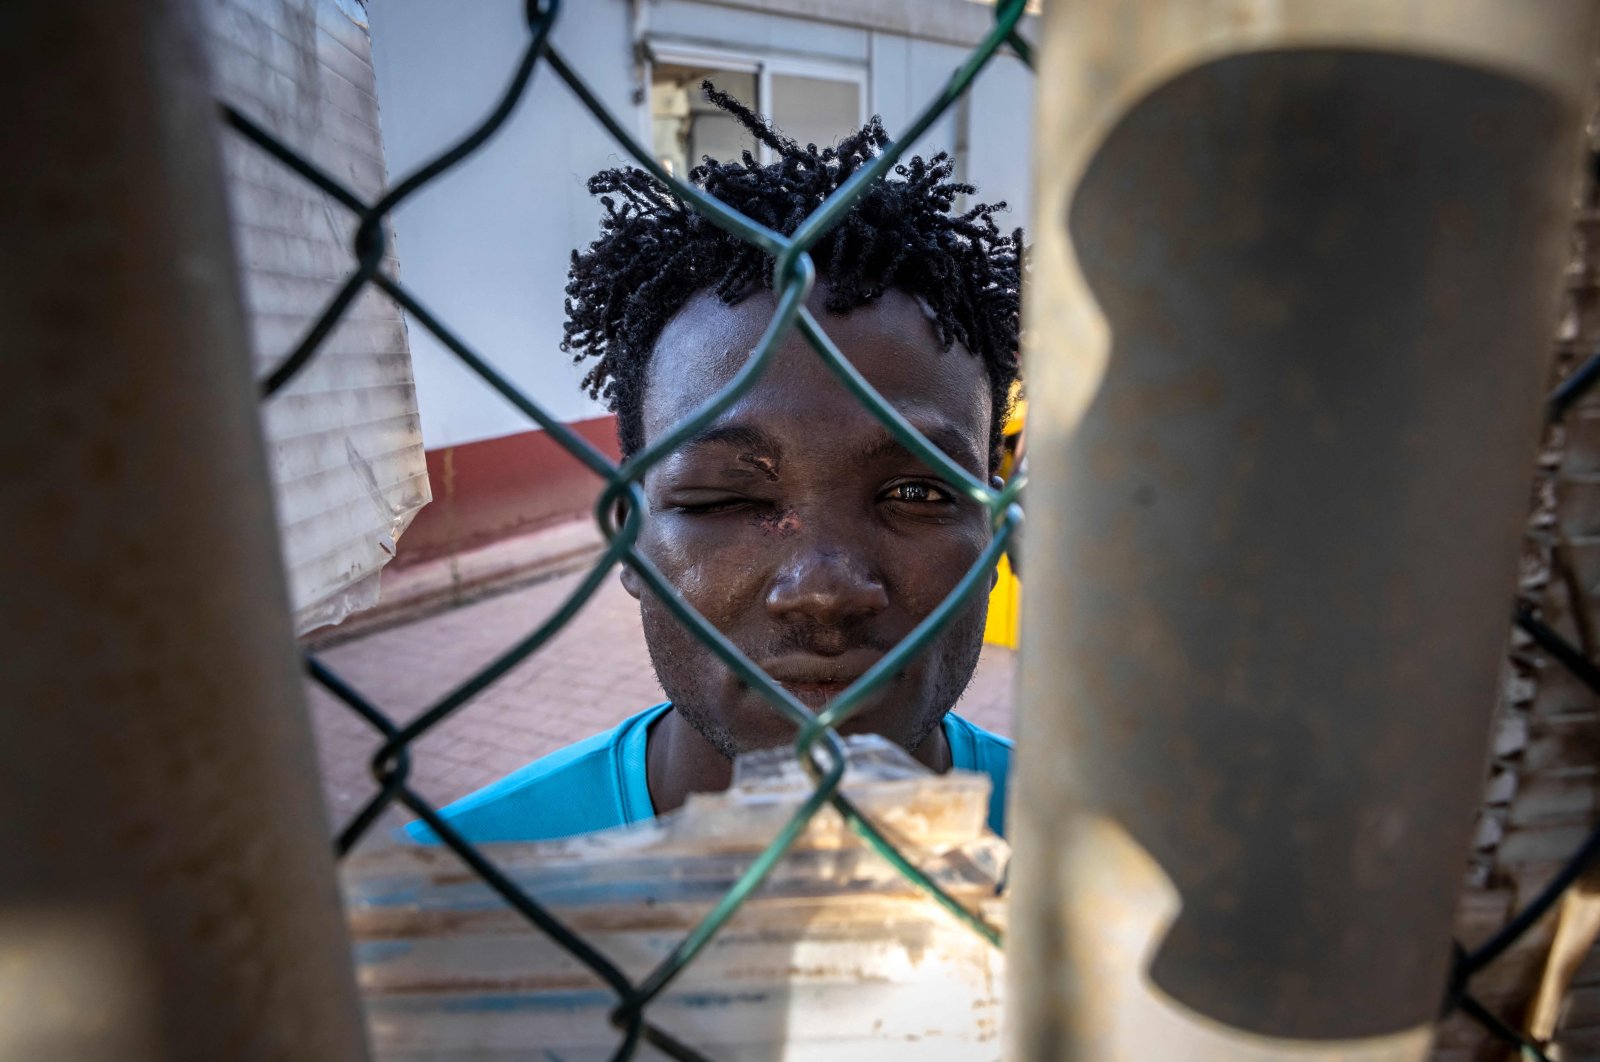 A Sudanese migrant with an eye injury is pictured in the temporary center for immigrants and asylum-seekers in the Spanish enclave of Melilla, Spain, June 25, 2022. (AFP Photo)